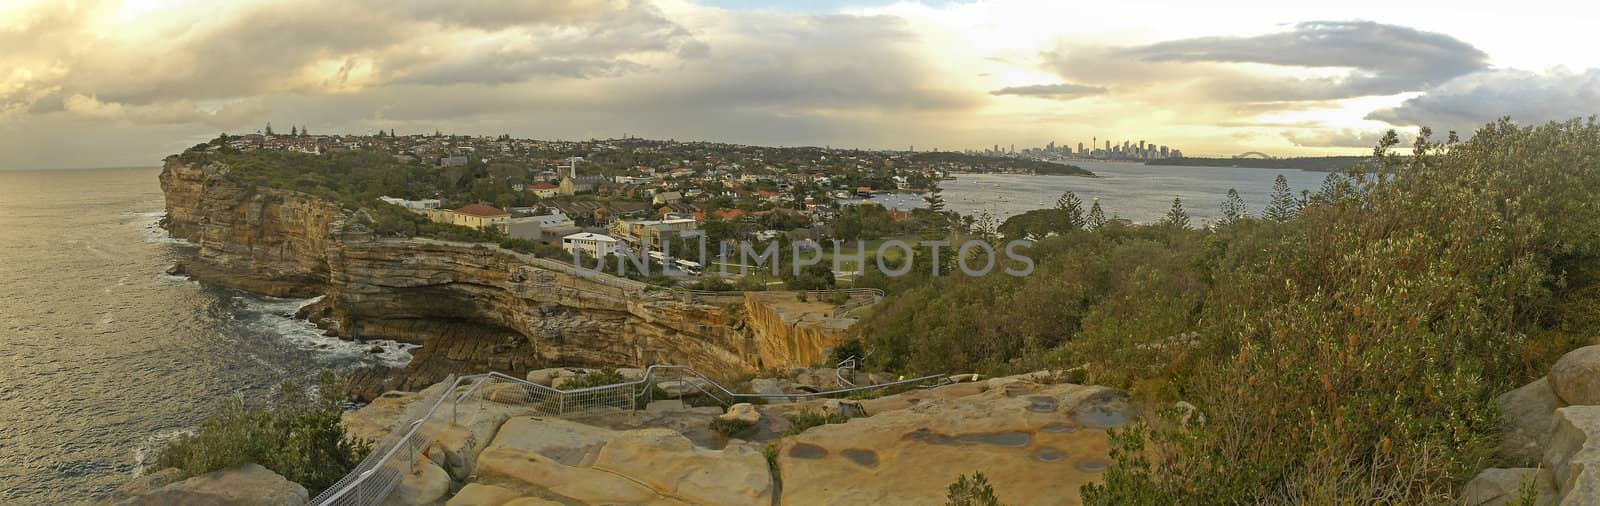 view from watson bay, sydney cbd in background, panorama photo